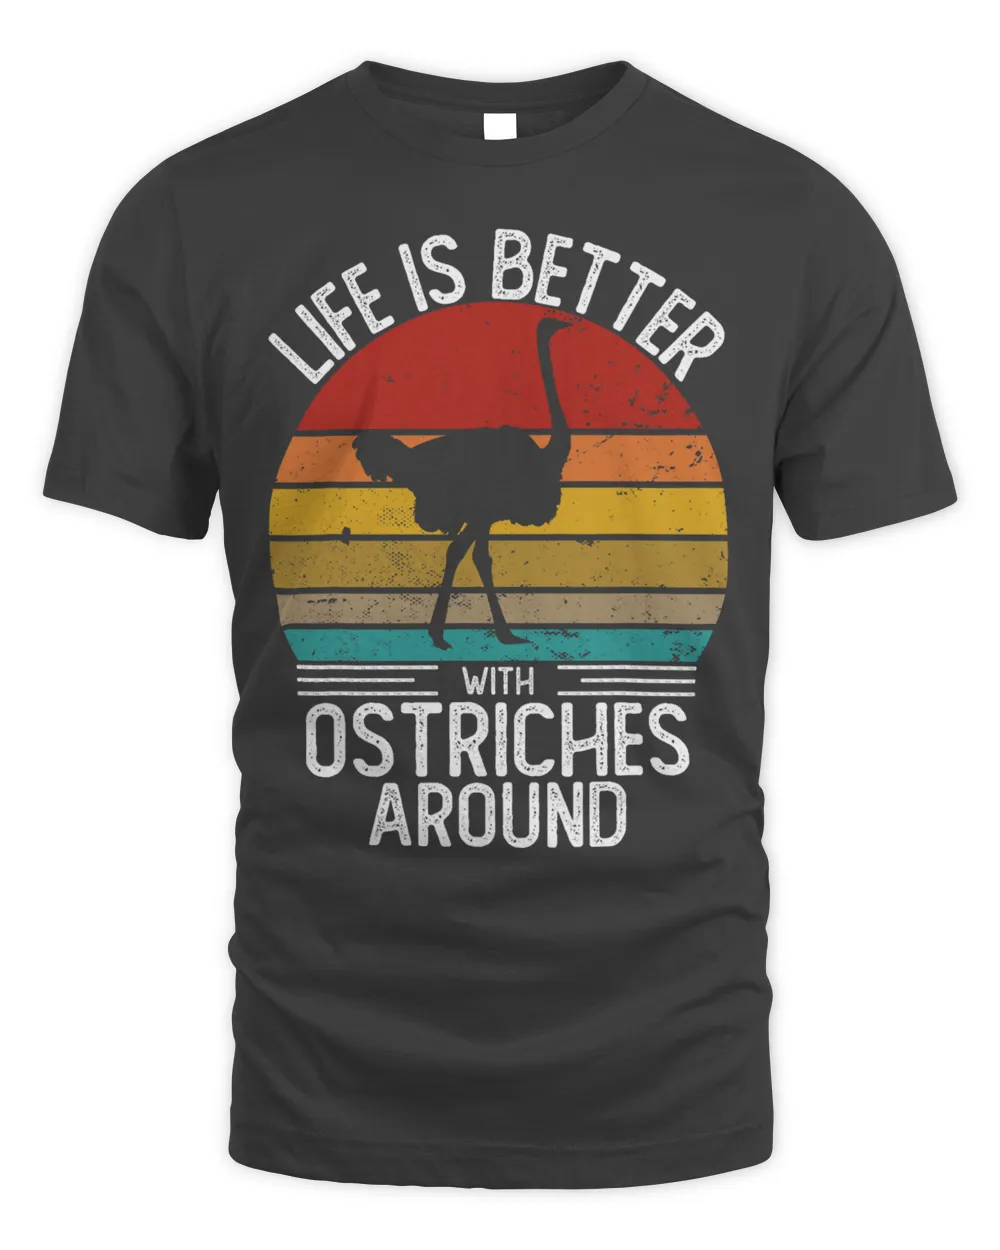 Life is Better with Ostriches Around Shirt Retro Ostrich